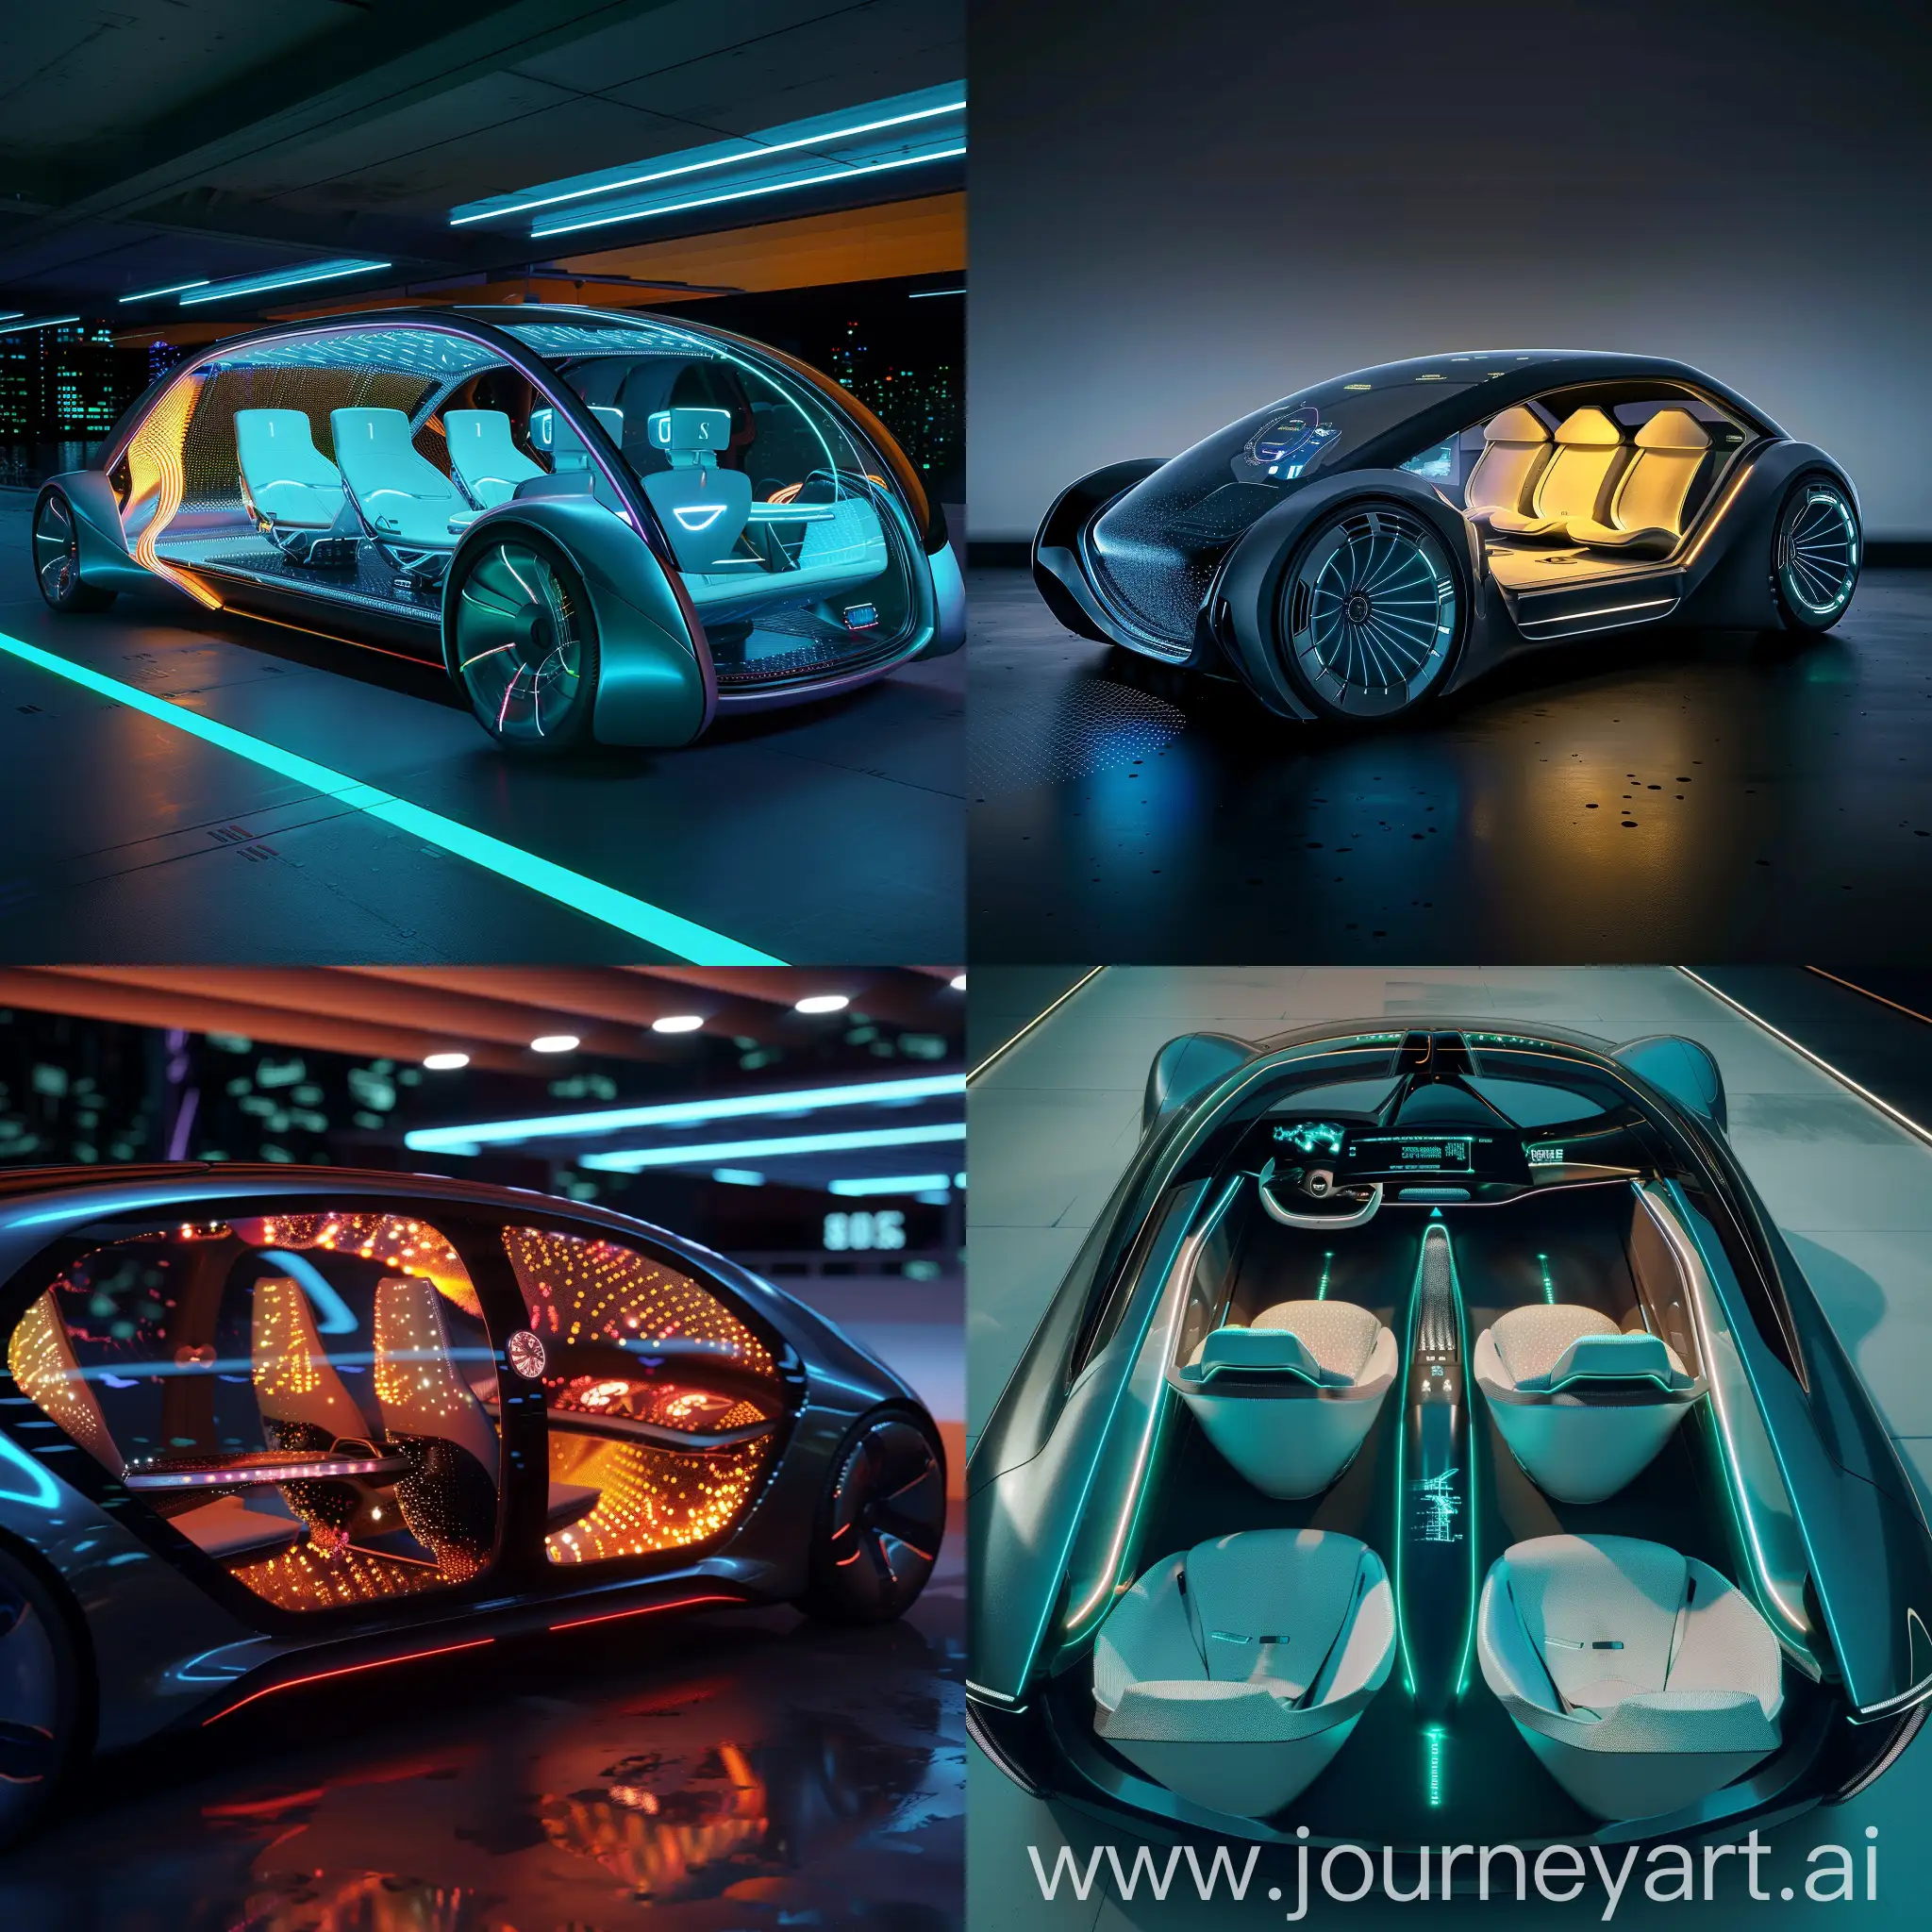 Futuristic-Car-with-Holographic-Displays-and-Smart-Seating